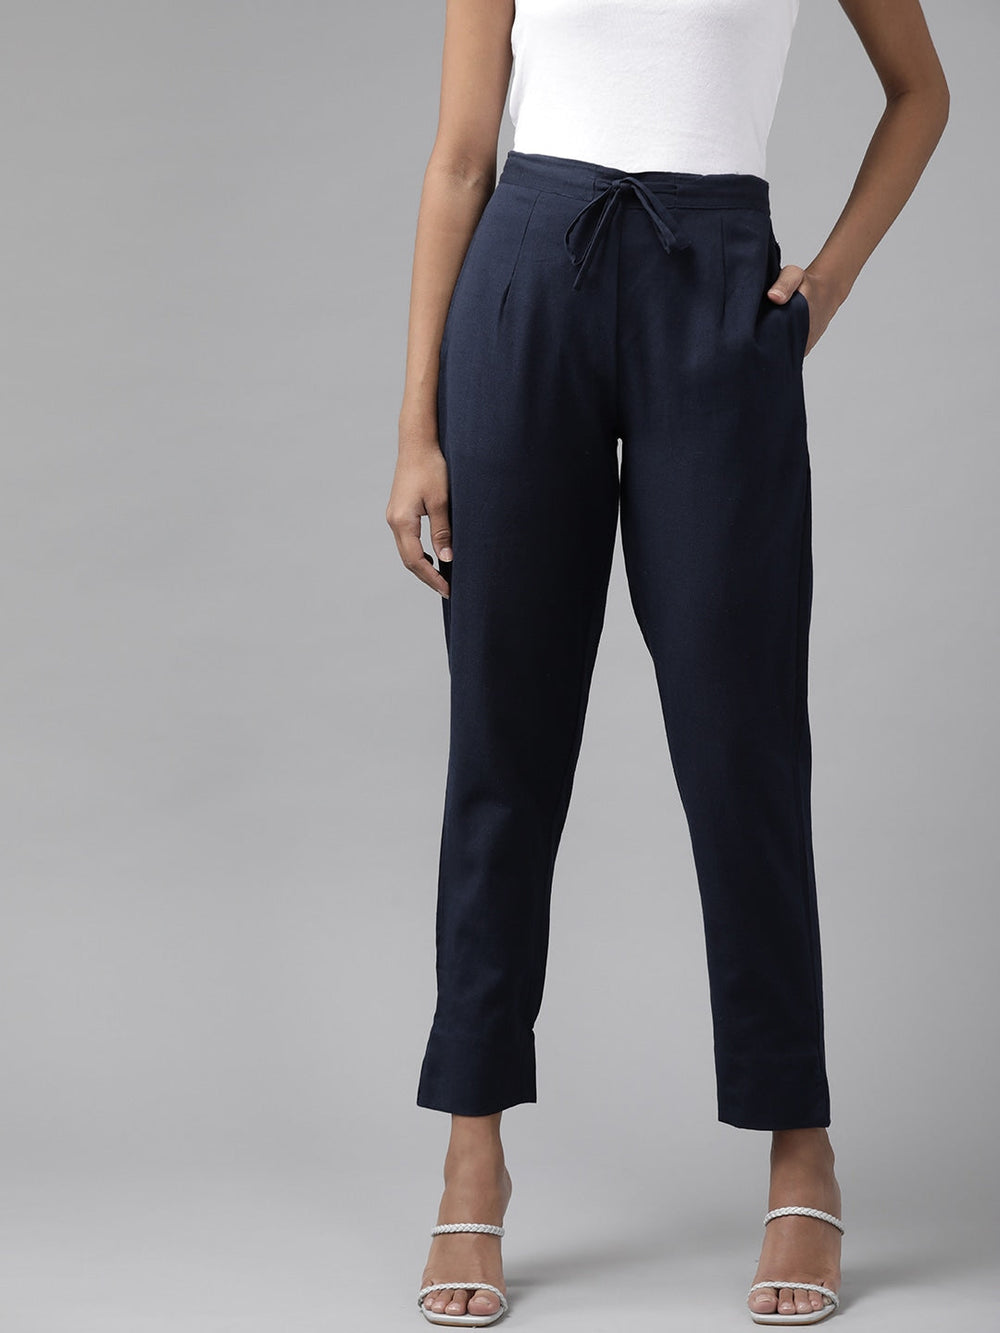 Navy Blue Cotton Fit Trousers Yufta Store